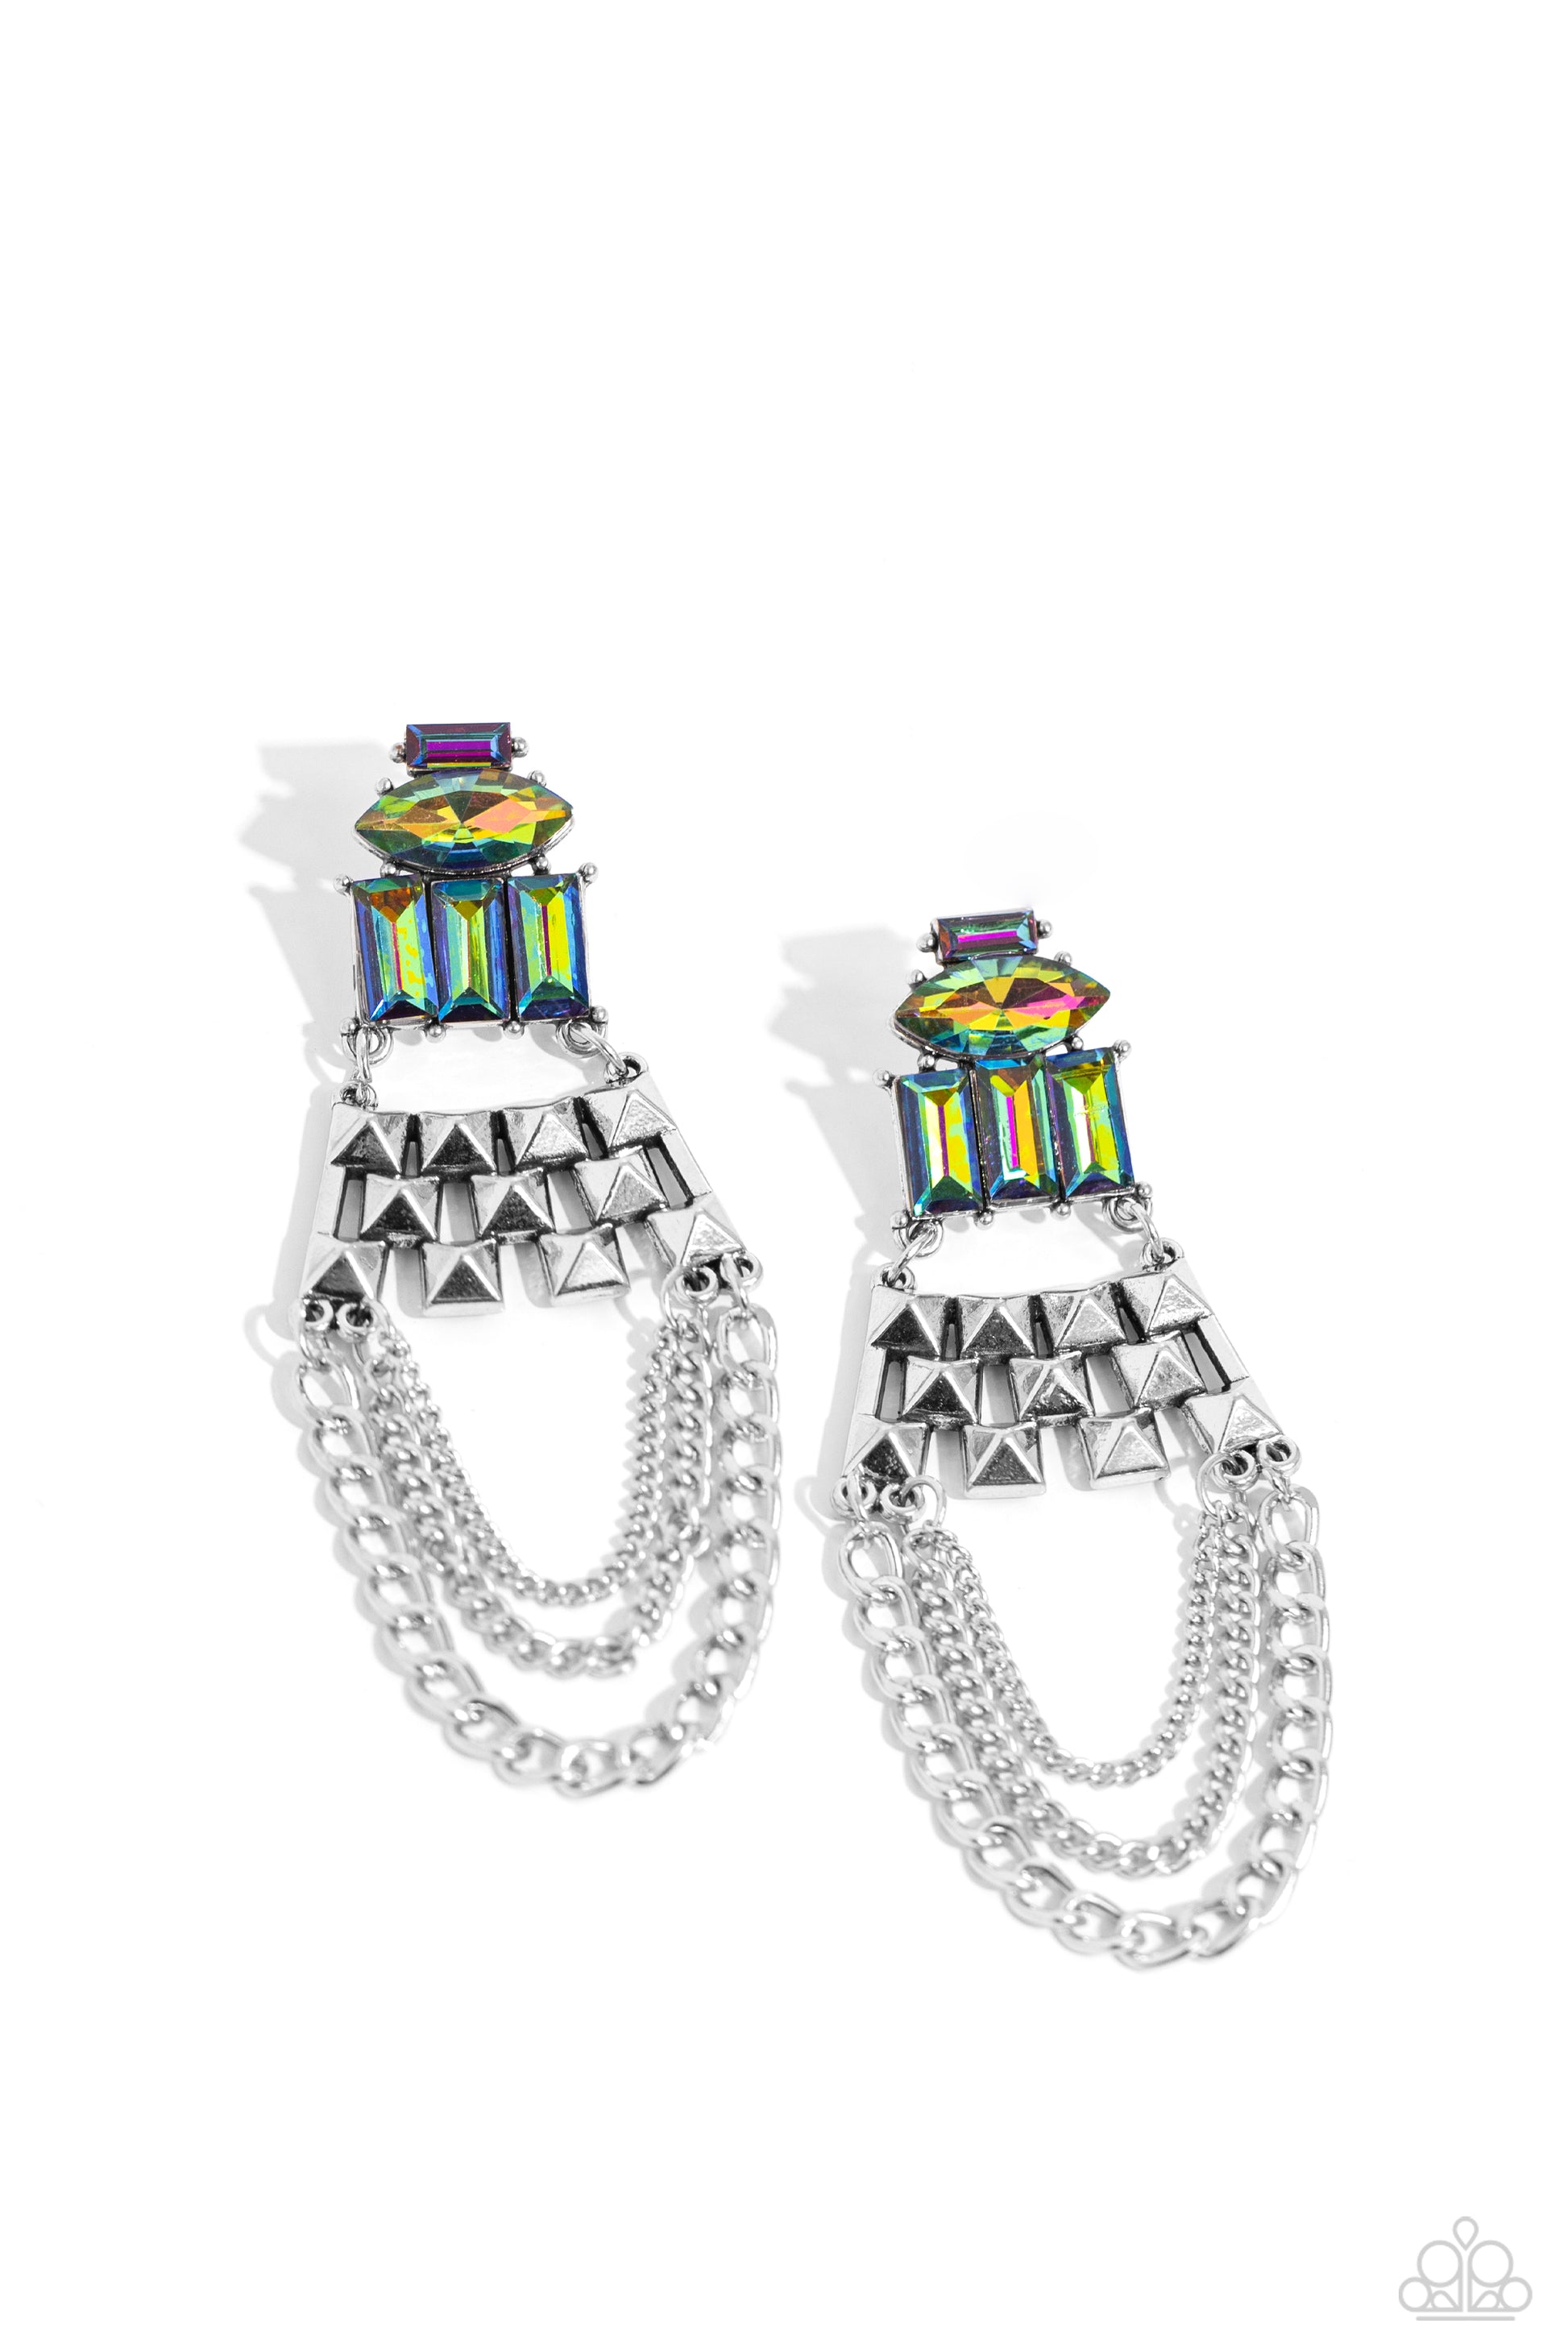 Paparazzi Accessories - Dangling Art Deco - Multi Earrings featuring silver pronged fittings, a collection of emerald-cut and marquise-cut oil spill beads layer atop one another, connecting to a haphazard pattern of silver squares that come to a point. Mismatched silver chains swing from the bottom of the spiked silver fittings, creating an edgy art-deco-inspired chandelier. Earring attaches to a standard post fitting.  Sold as one pair of post earrings.